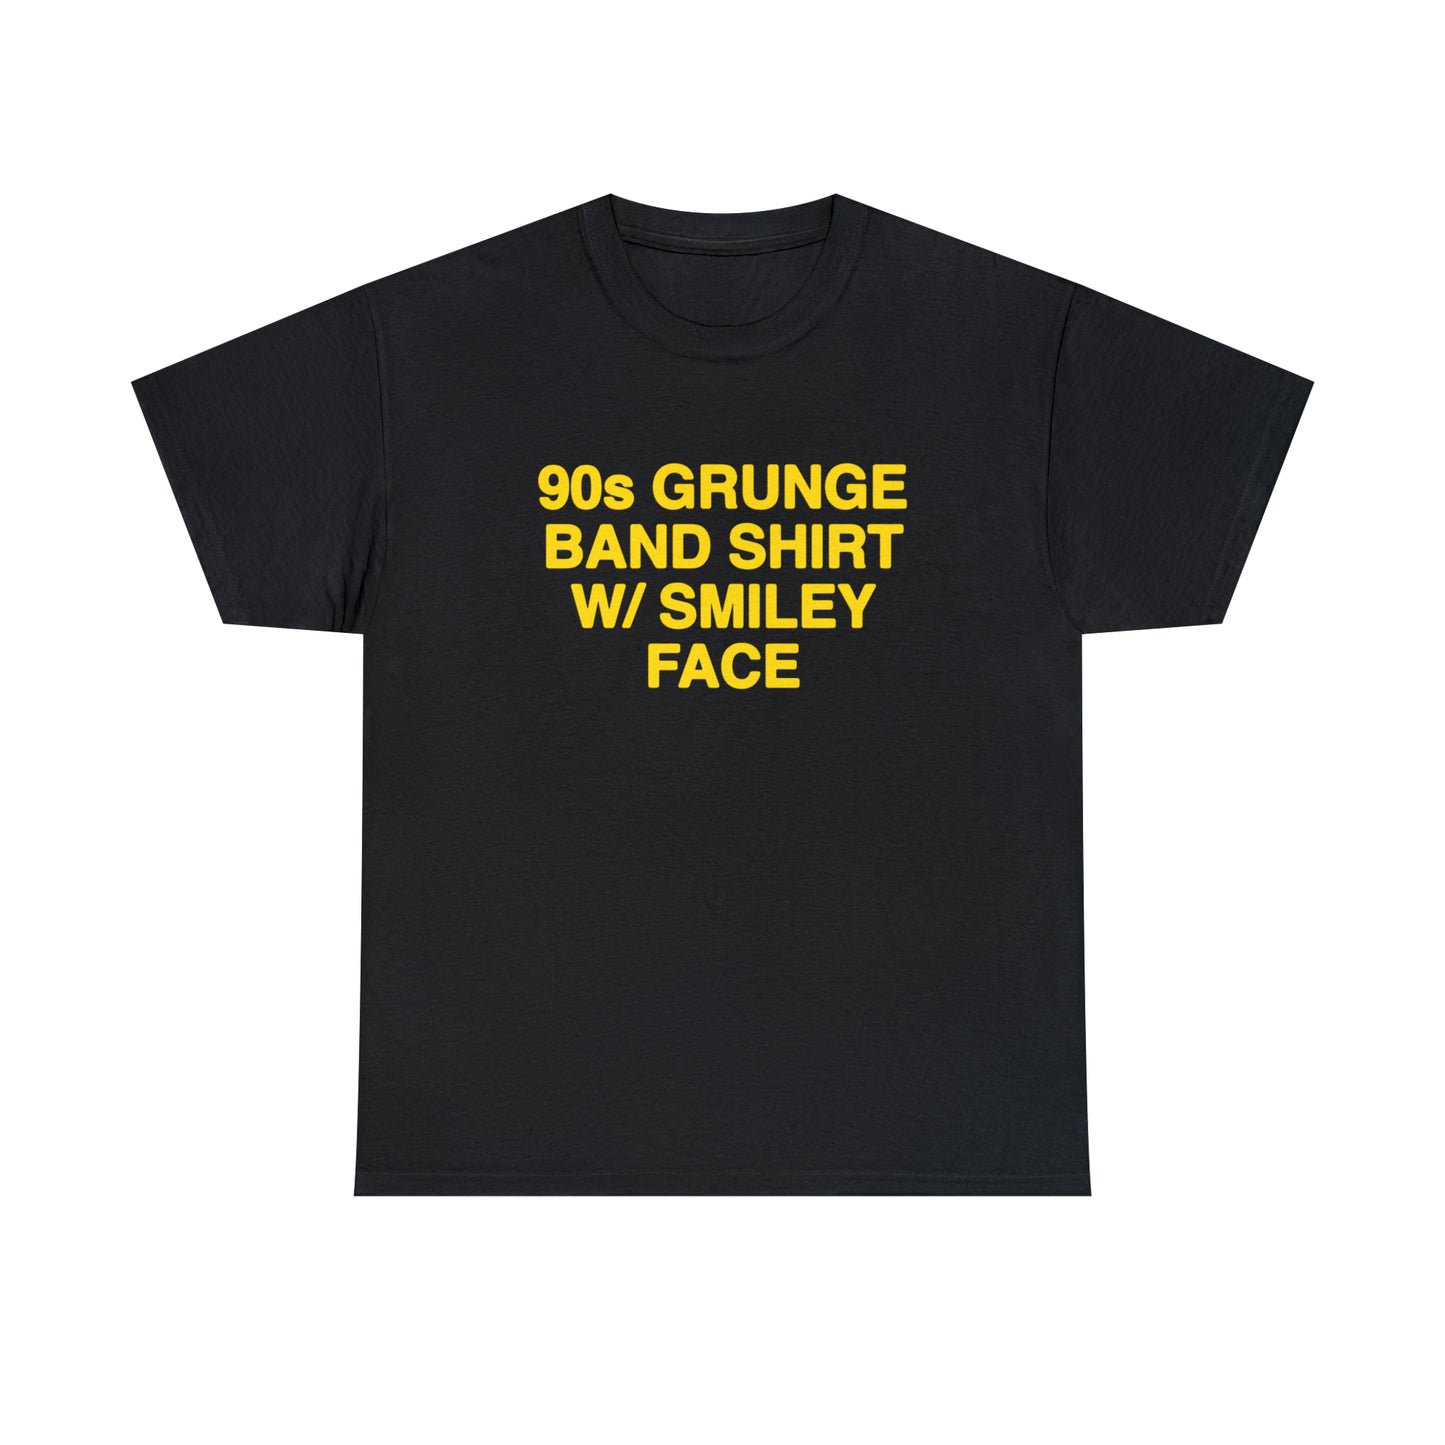 90s Grunge Band Shirt W/ Smiley Face.